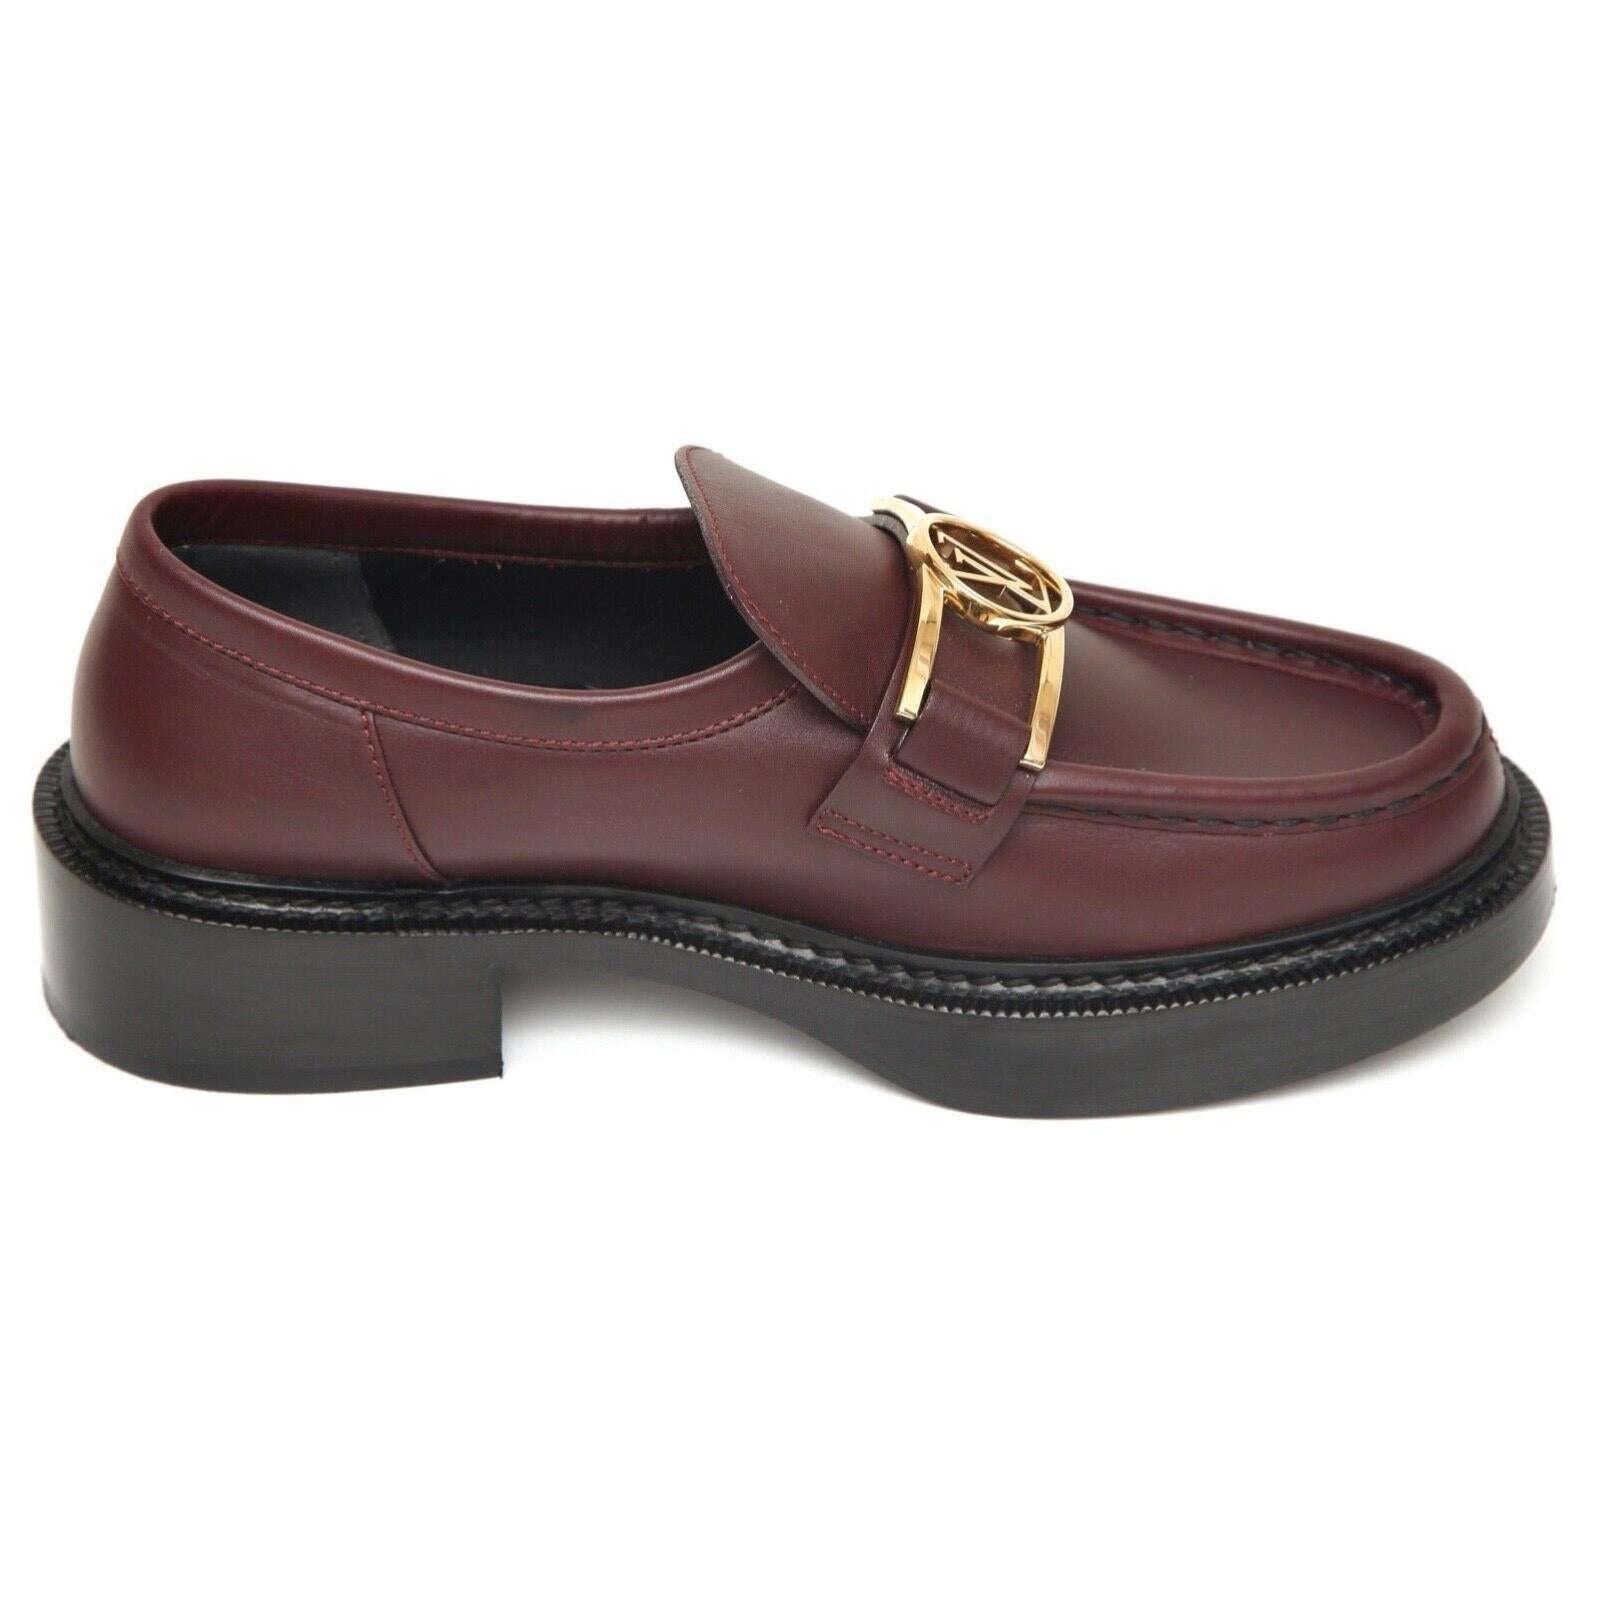 GUARANTEED AUTHENTIC LOUIS VUITTON LEATHER ACADEMY LOAFER

Retail excluding sales taxes $1,260

Details:
- ACADEMY loafer in a burgundy red leather.
- Gold-tone metal LV Dauphine over vamp.
- Slip on.
- Leather insole and sole.
- Comes with dust